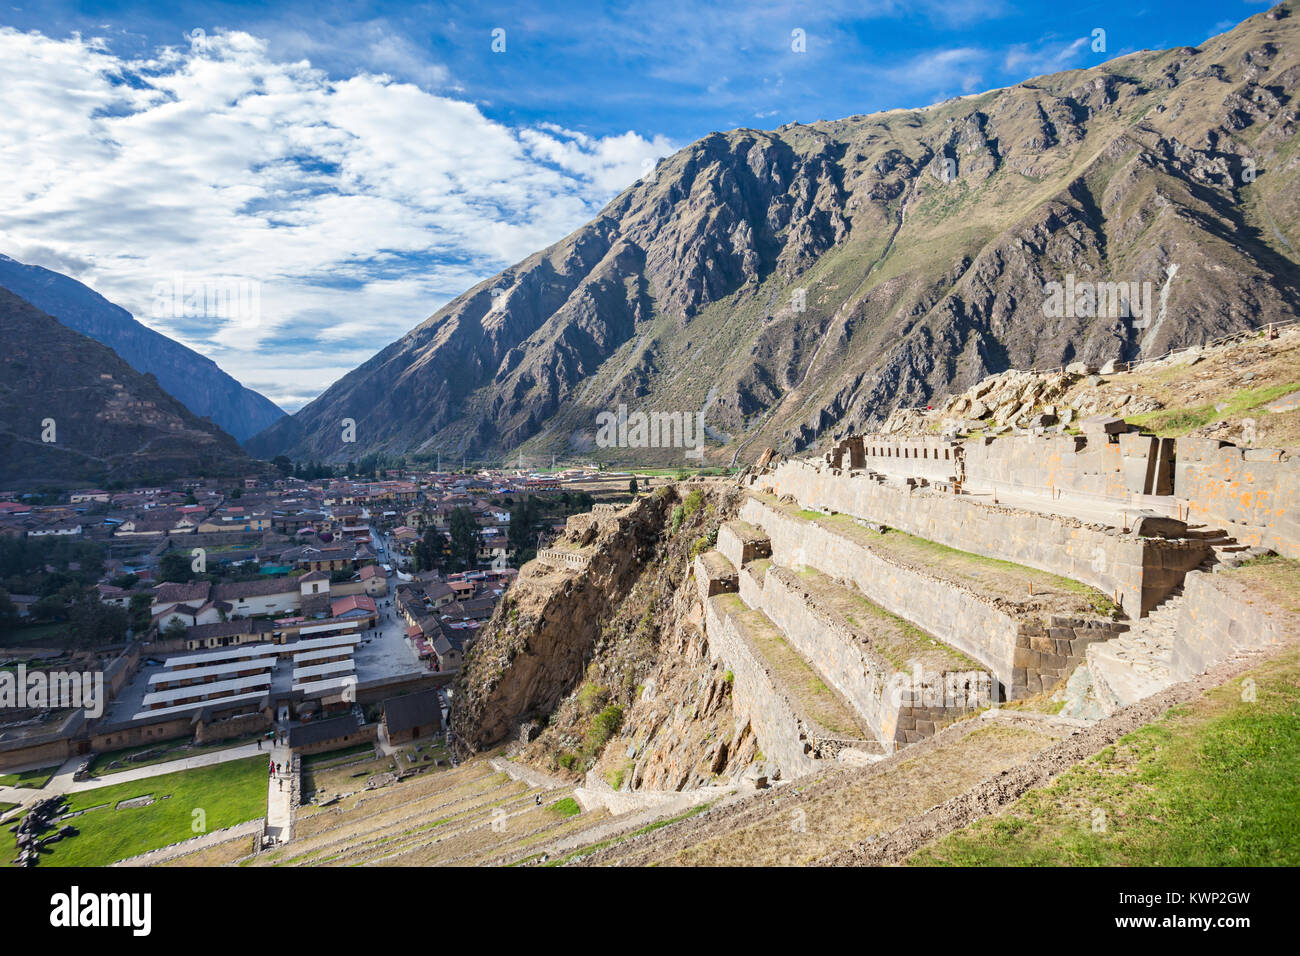 Ollantaytambo Ruins. Ollantaytambo is a town and an Inca archaeological site in southern Peru. Stock Photo